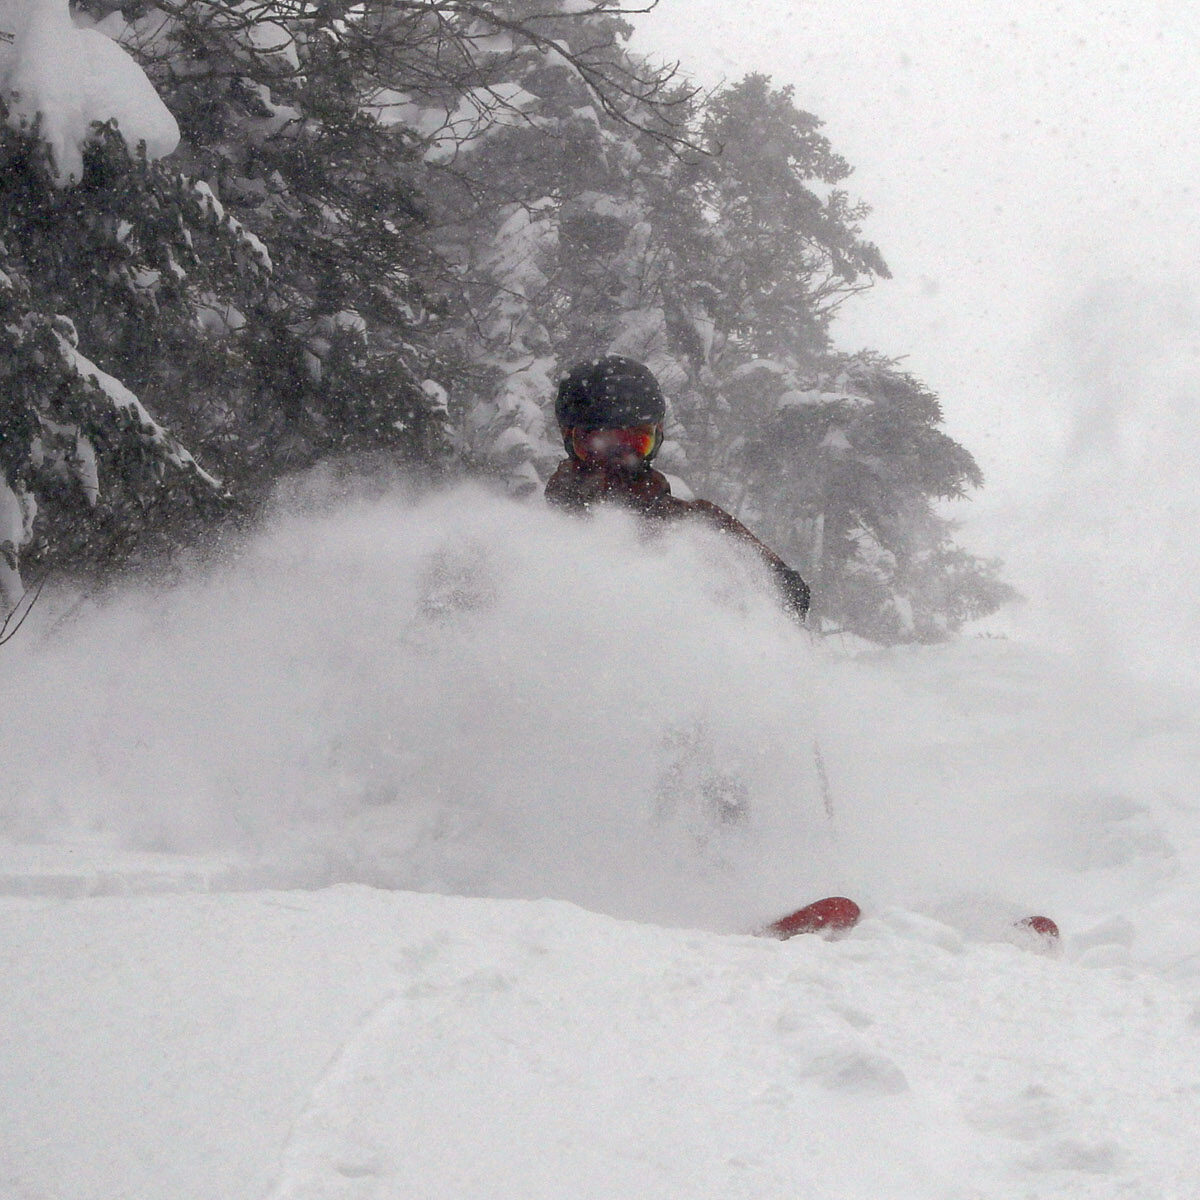 An image of Dylan skiing deep powder on the steep headwall of the Wilderness Liftline during Winter Storm Sage at Bolton Valley Resort in Vermont